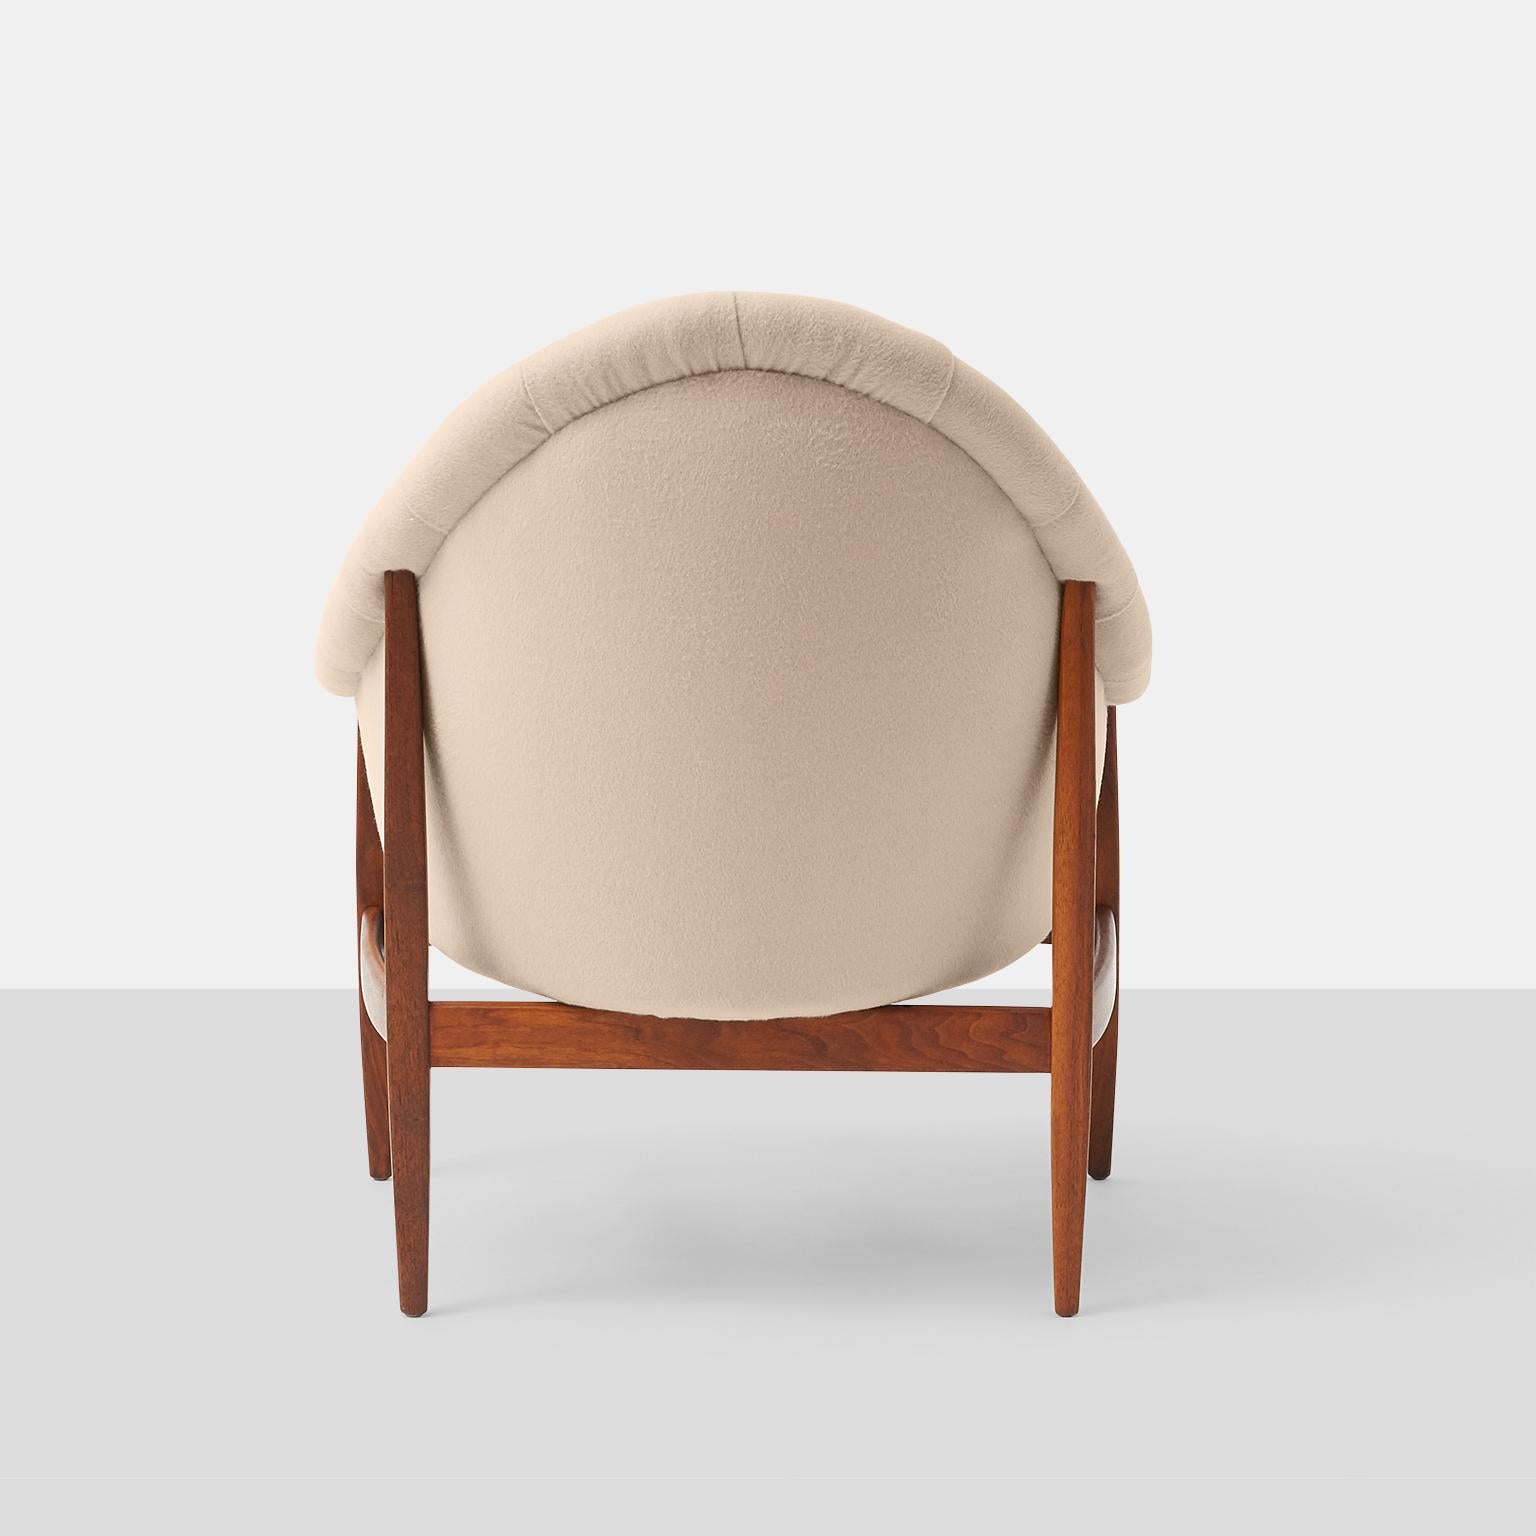 Hand-Crafted Tufted Chairs by Milo Baughman